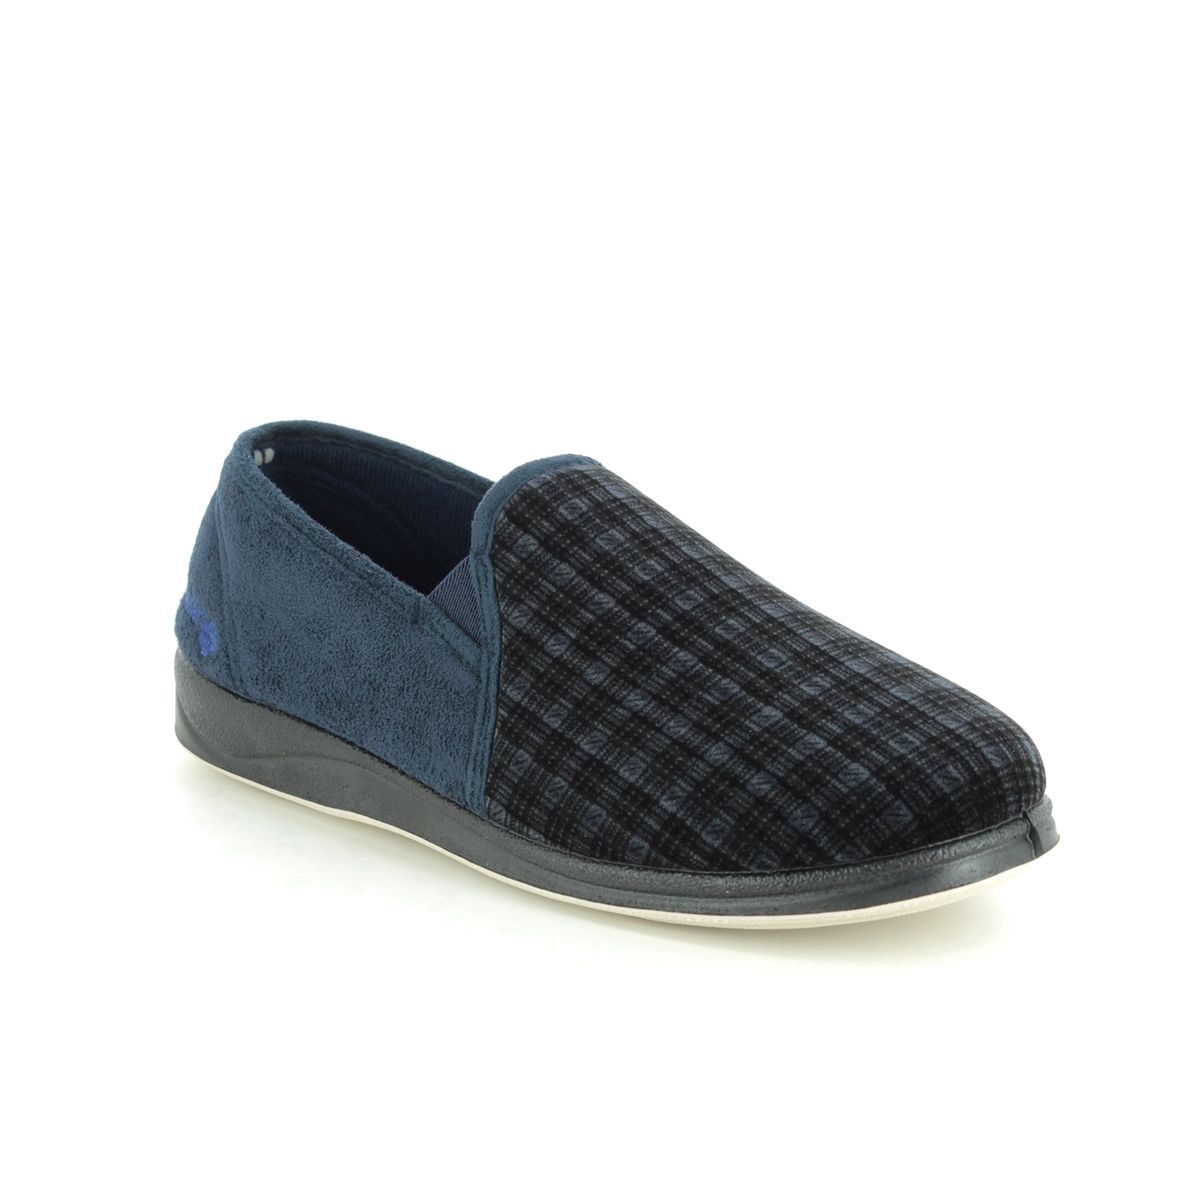 Padders Albert G Fit Navy Mens slippers 408S-96 in a Tartan Textile in Size 7